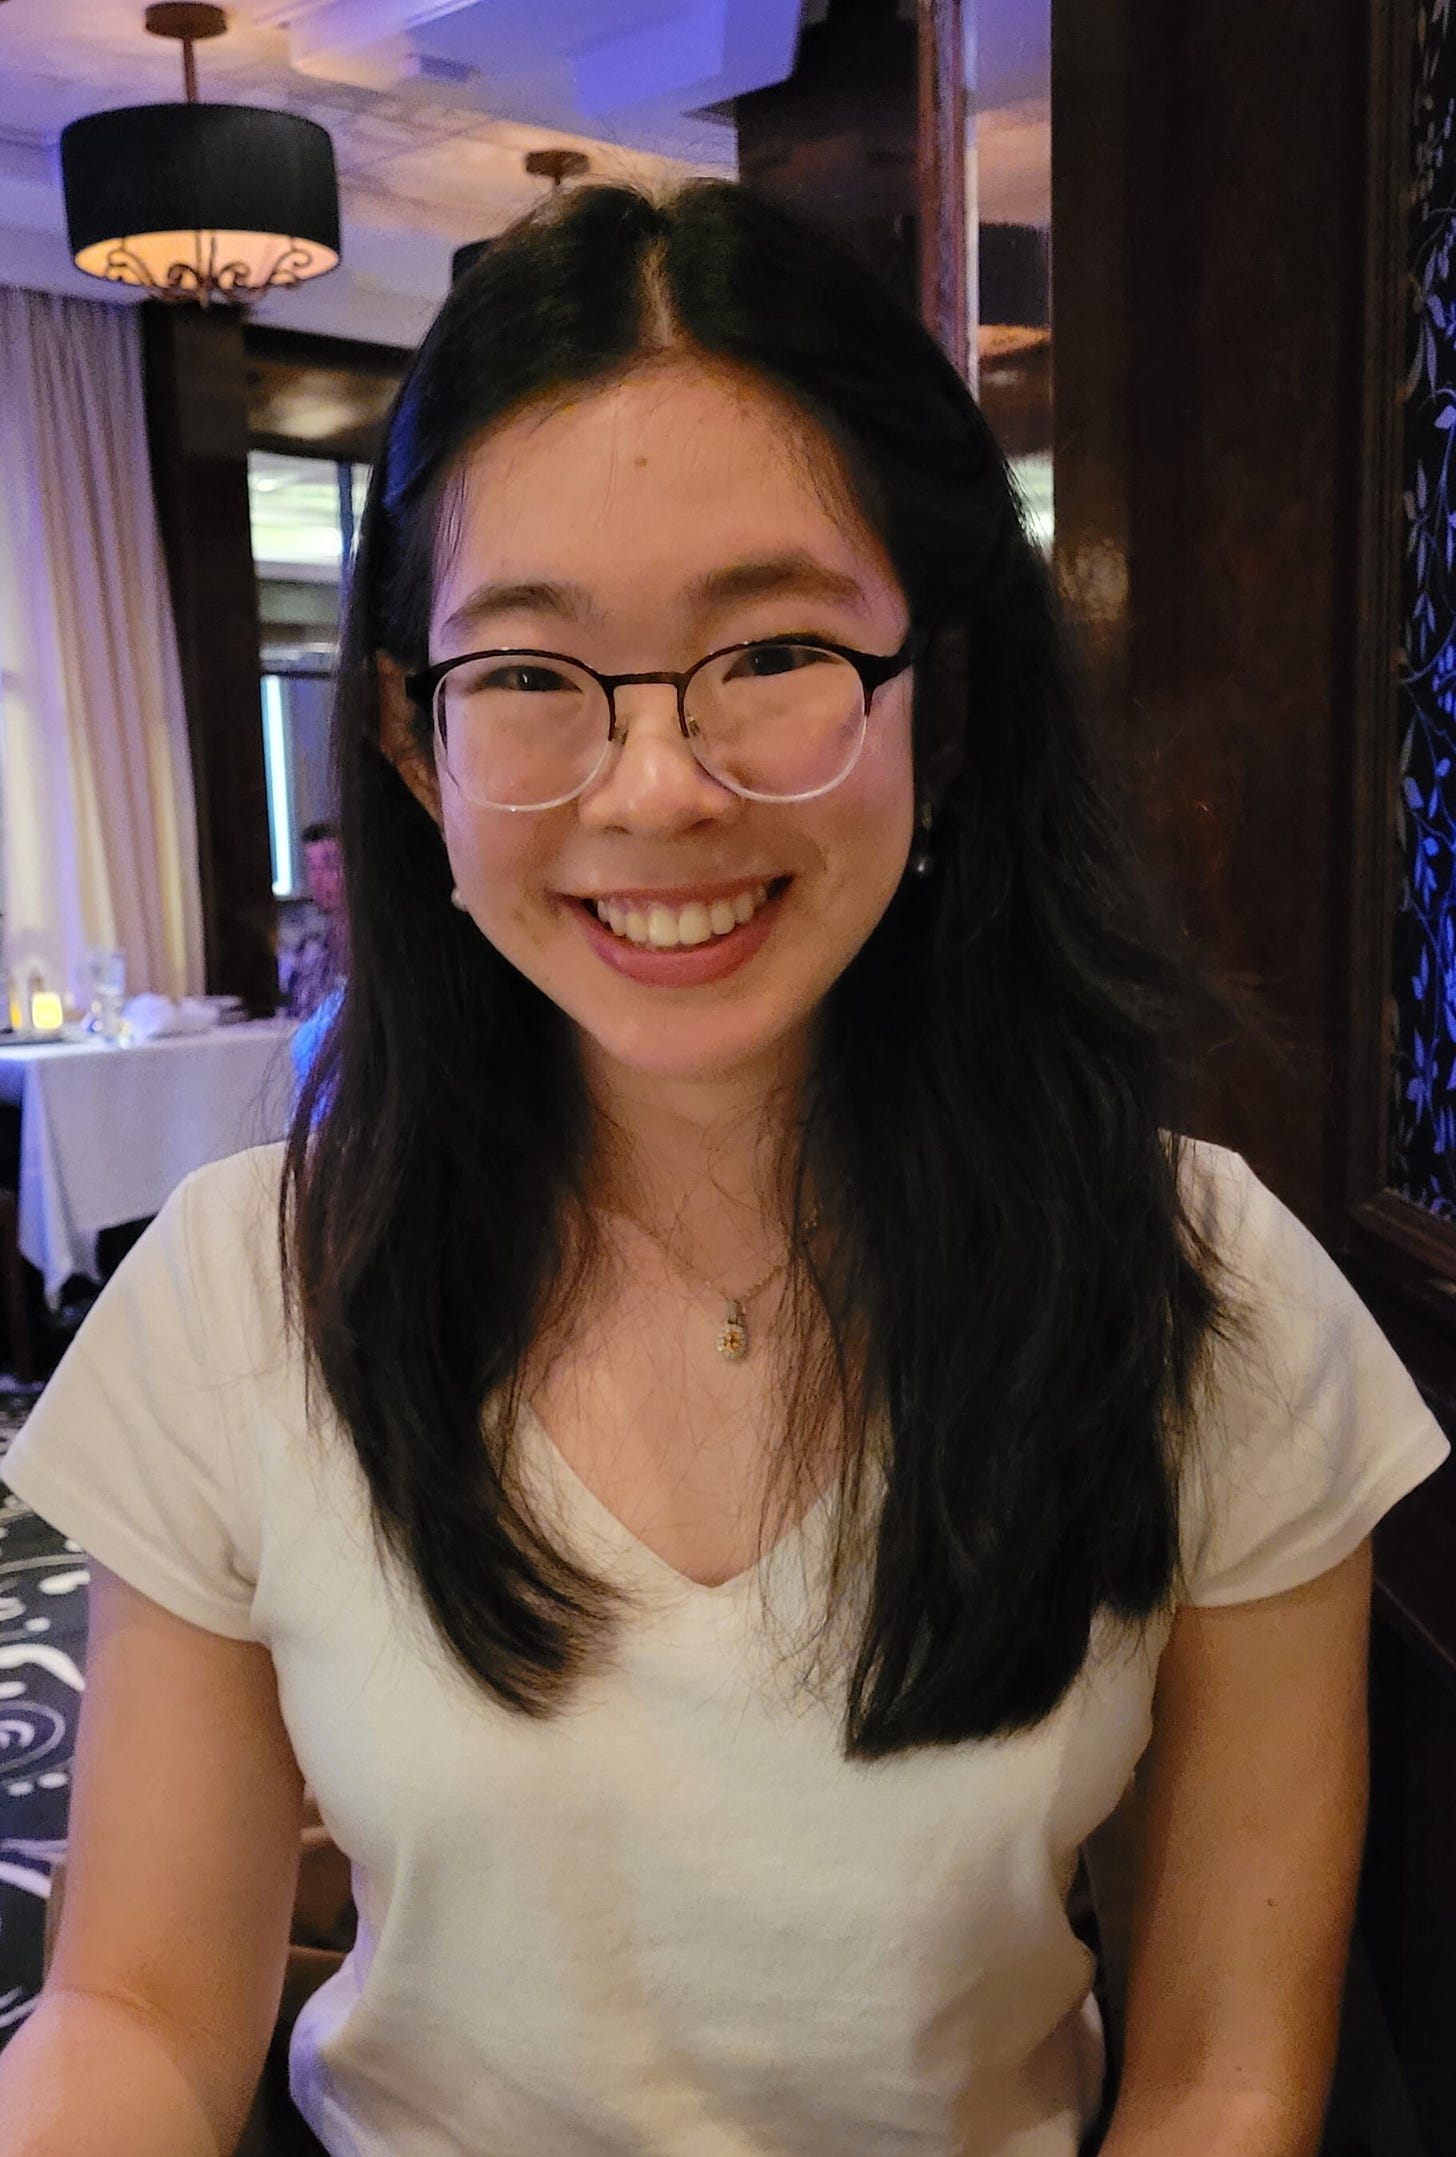 Smiling young woman with glasses and long black hair, wearing a white T-shirt.